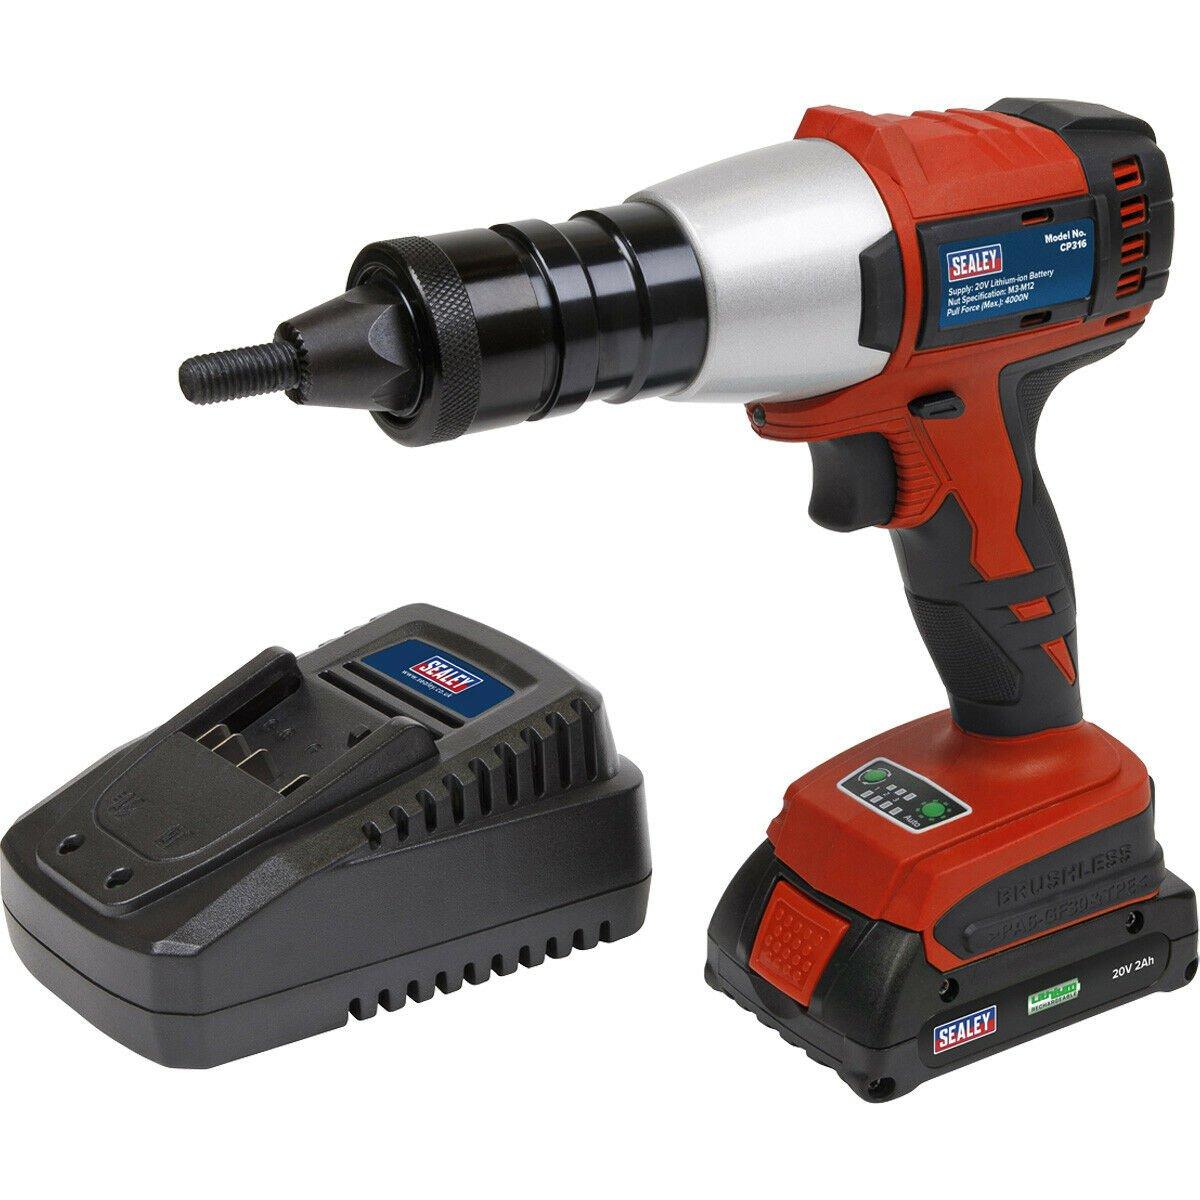 PRO Cordless NUT Riveter 20V 2Ah Lithium Ion Adjustable Nozzle 4000N Power Tool